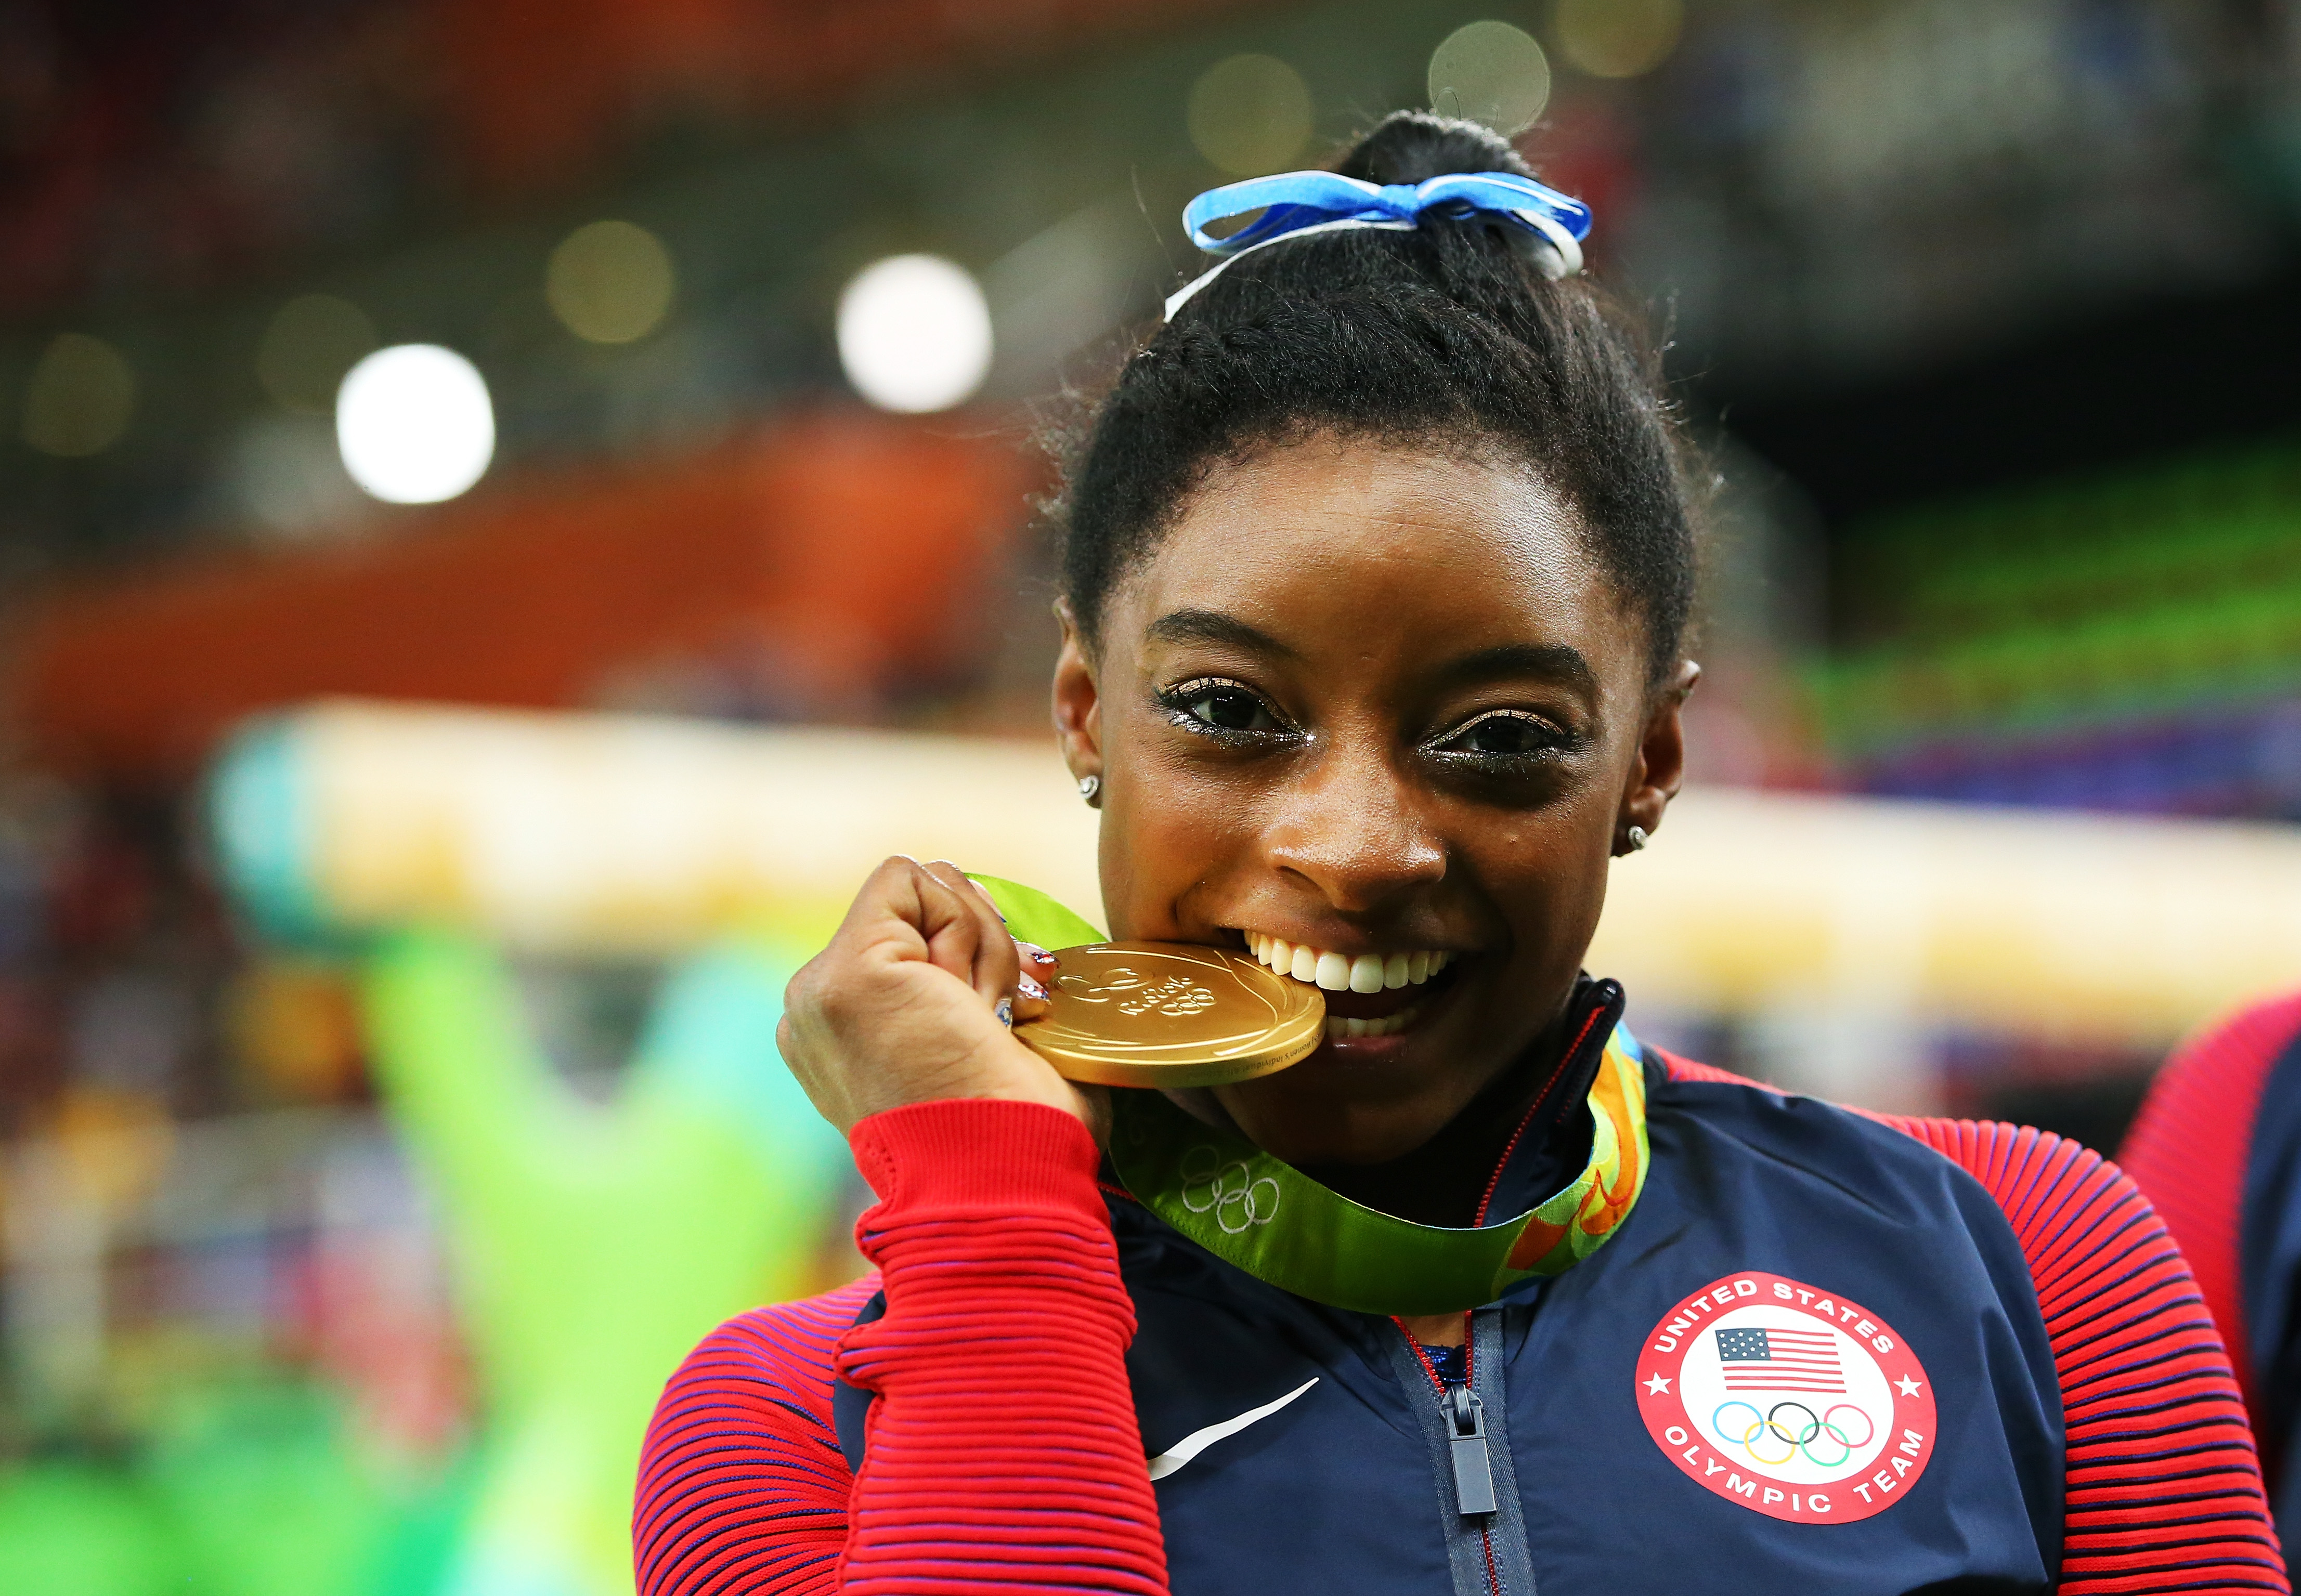 Simone Biles of the United States poses for photographs after the medal ceremony for the Women's Individual All Around on Day 6 of the 2016 Rio Olympics at Rio Olympic Arena on August 11, 2016 in Rio de Janeiro, Brazil. | Source: Getty Images